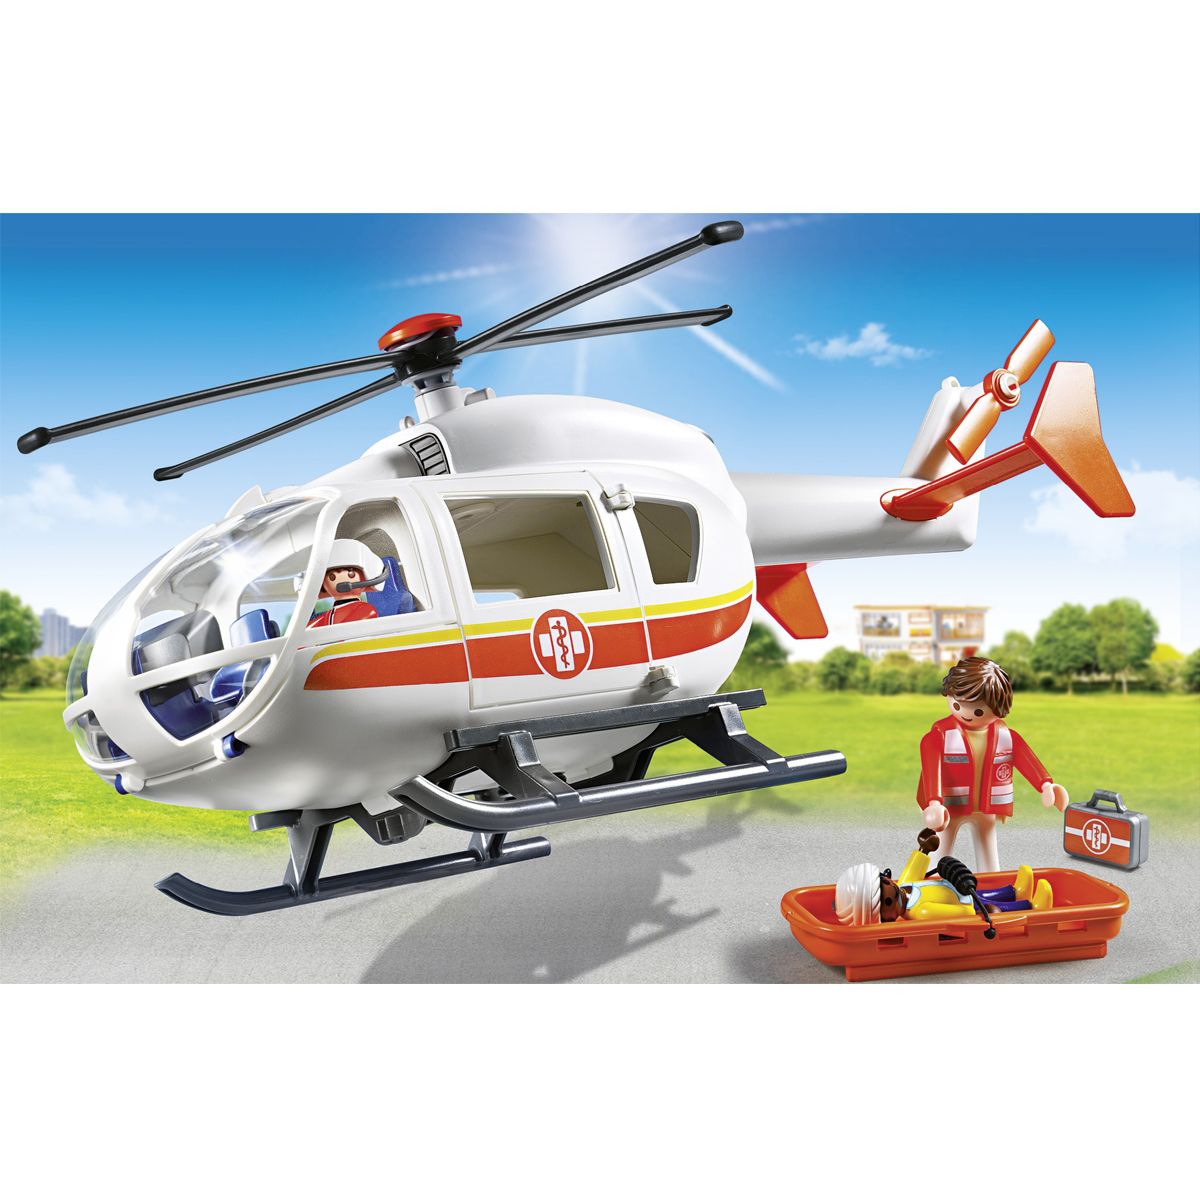 helicoptere playmobil hopital